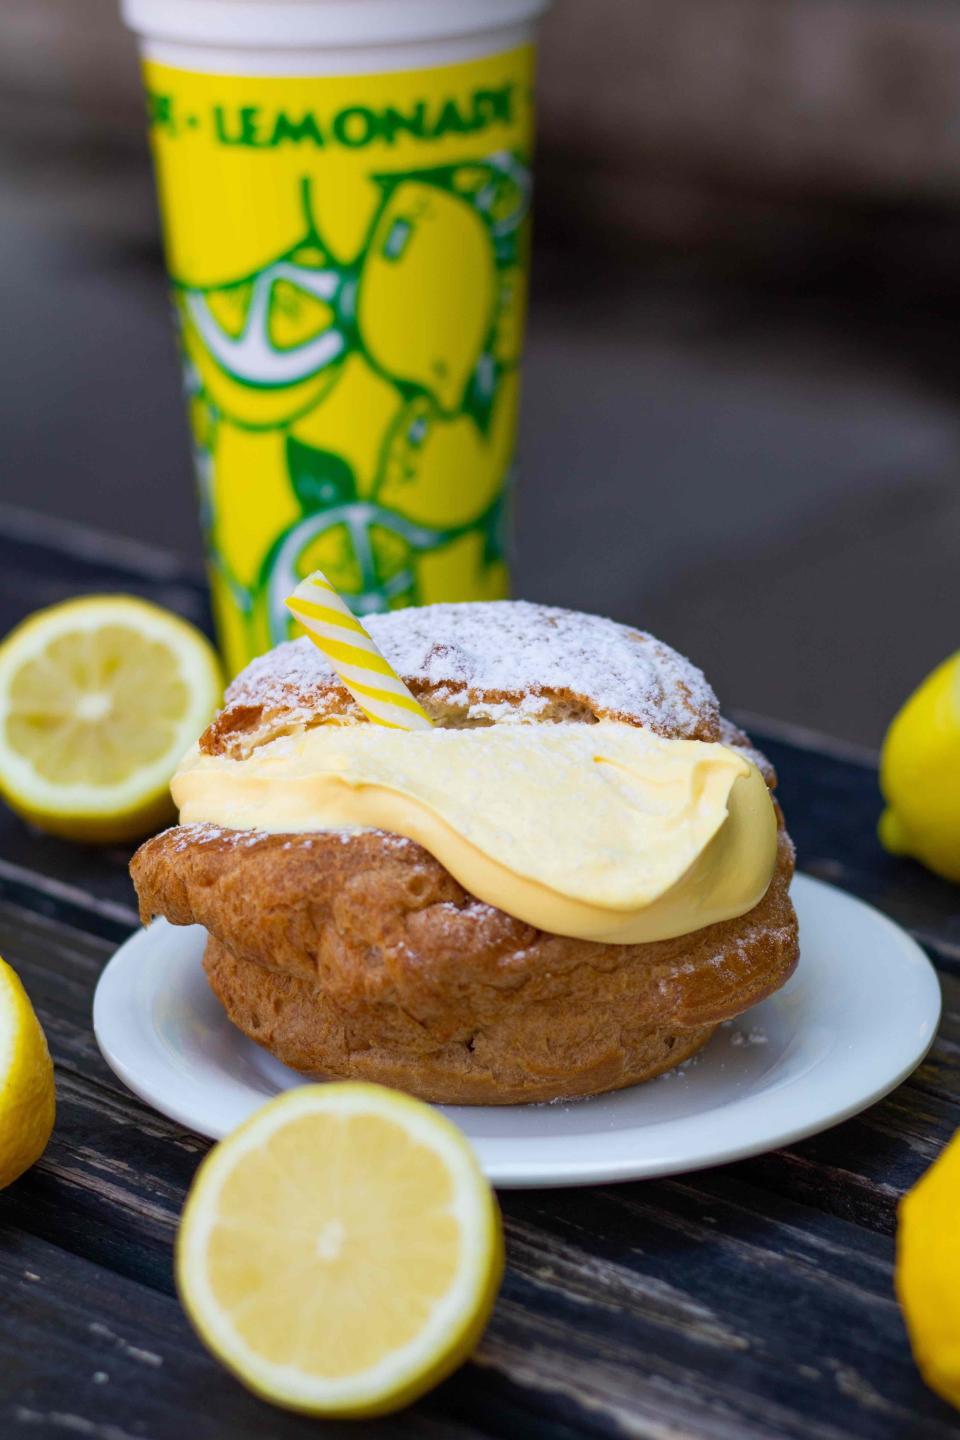 Schmidt’s Sausage Haus — a staple since 1914, making it the oldest food vendor at the fair — introduces an upscale twist on a classic fair beverage with their Lemon Shake Up Cream Puff.